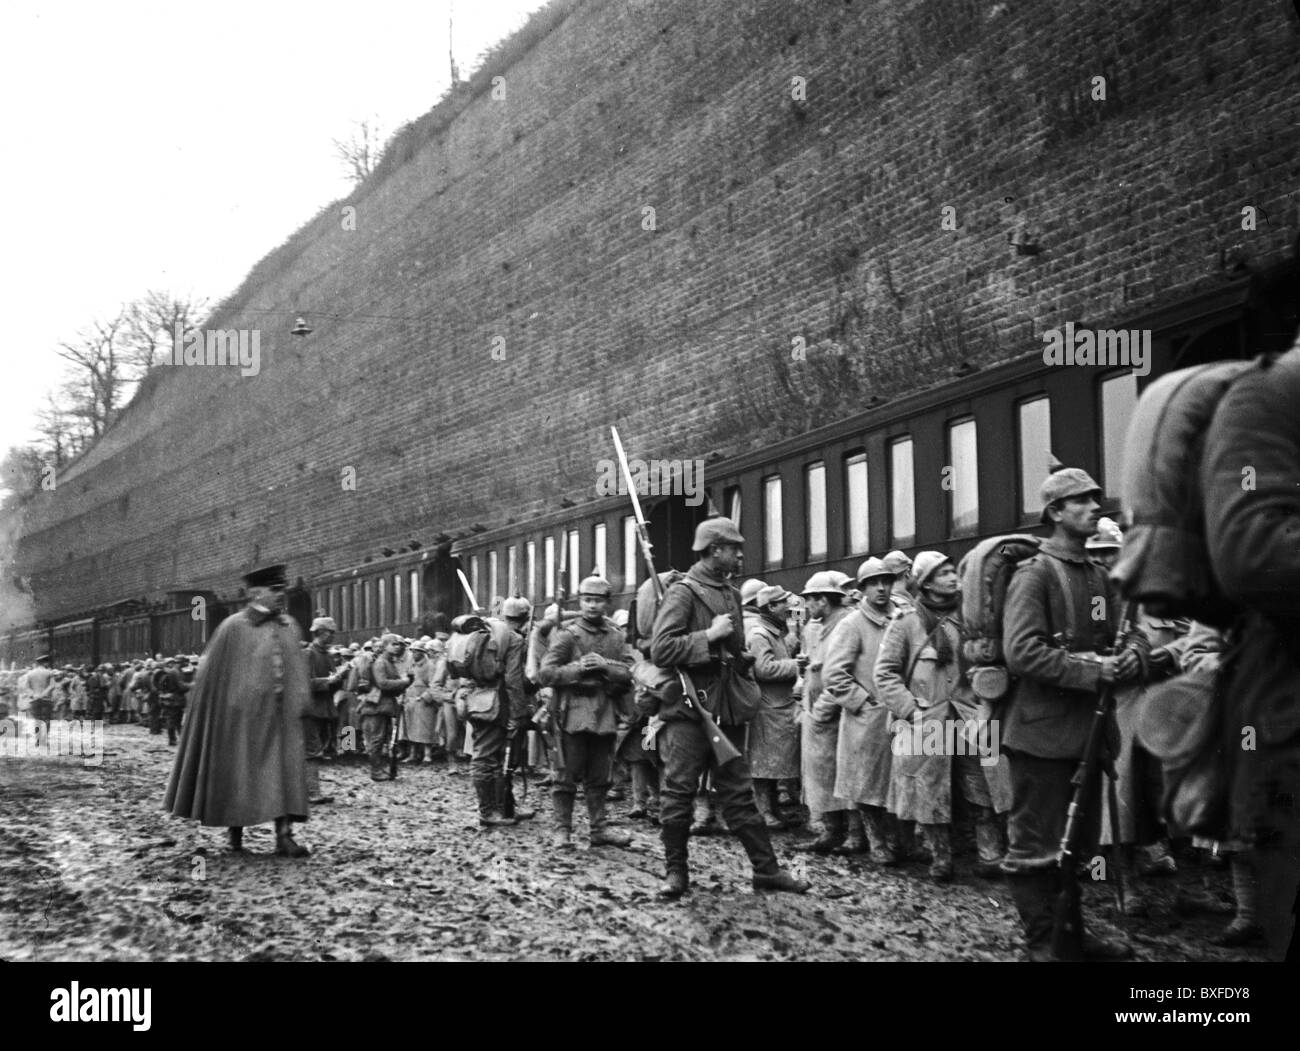 events, First World War / WWI, Western Front 1915 - 1918, German soldiers with French prisoners of war at a railway station, France, circa 1915/1916, 20th century, historic, historical, 1910s, 10s, Germany, military, German Reich, Empire, uniform, uniforms, captivity, POW, POWs, guard, pickelhaube, spiked helmet, rifle, bayonet, train, people, Additional-Rights-Clearences-Not Available Stock Photo